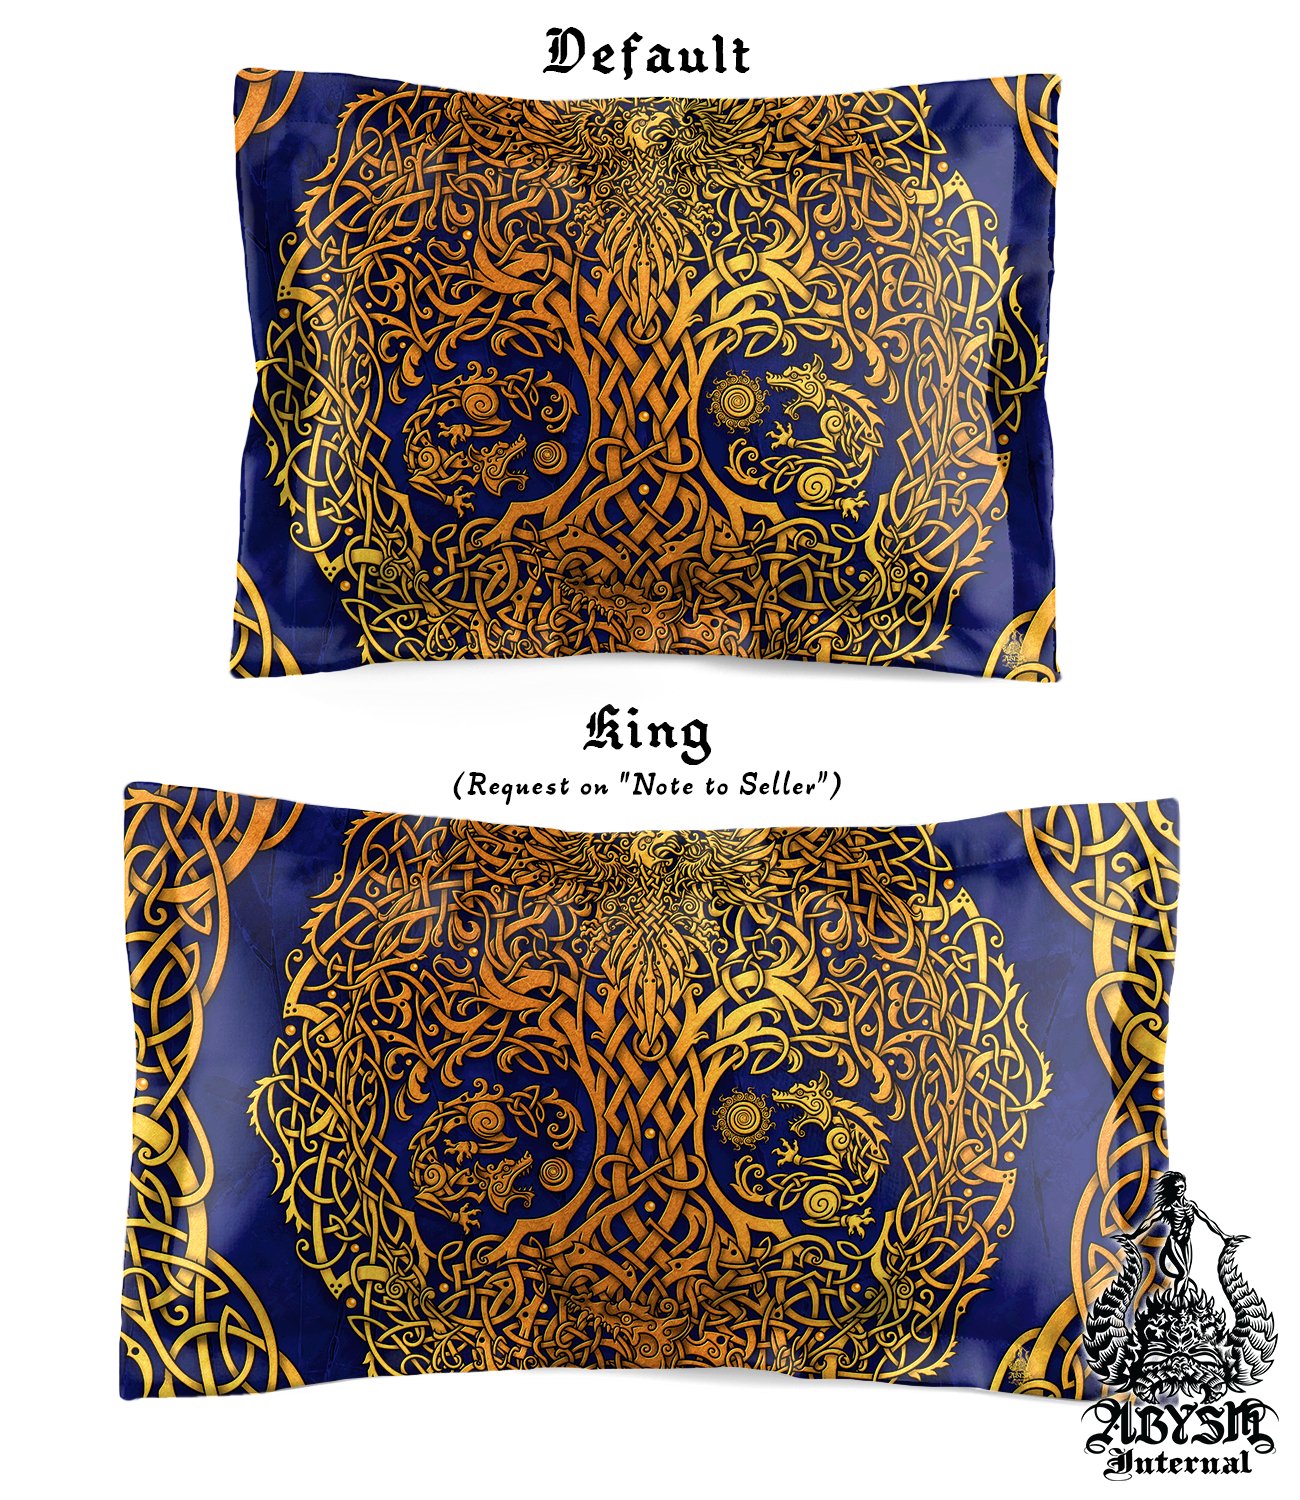 Gold Yggdrasil Bedding Set, Comforter or Duvet, Viking Tree of Life, Norse Bed Cover, Bedroom Decor, King, Queen & Twin Size - 3 Colors: Red, Black, Blue - Abysm Internal